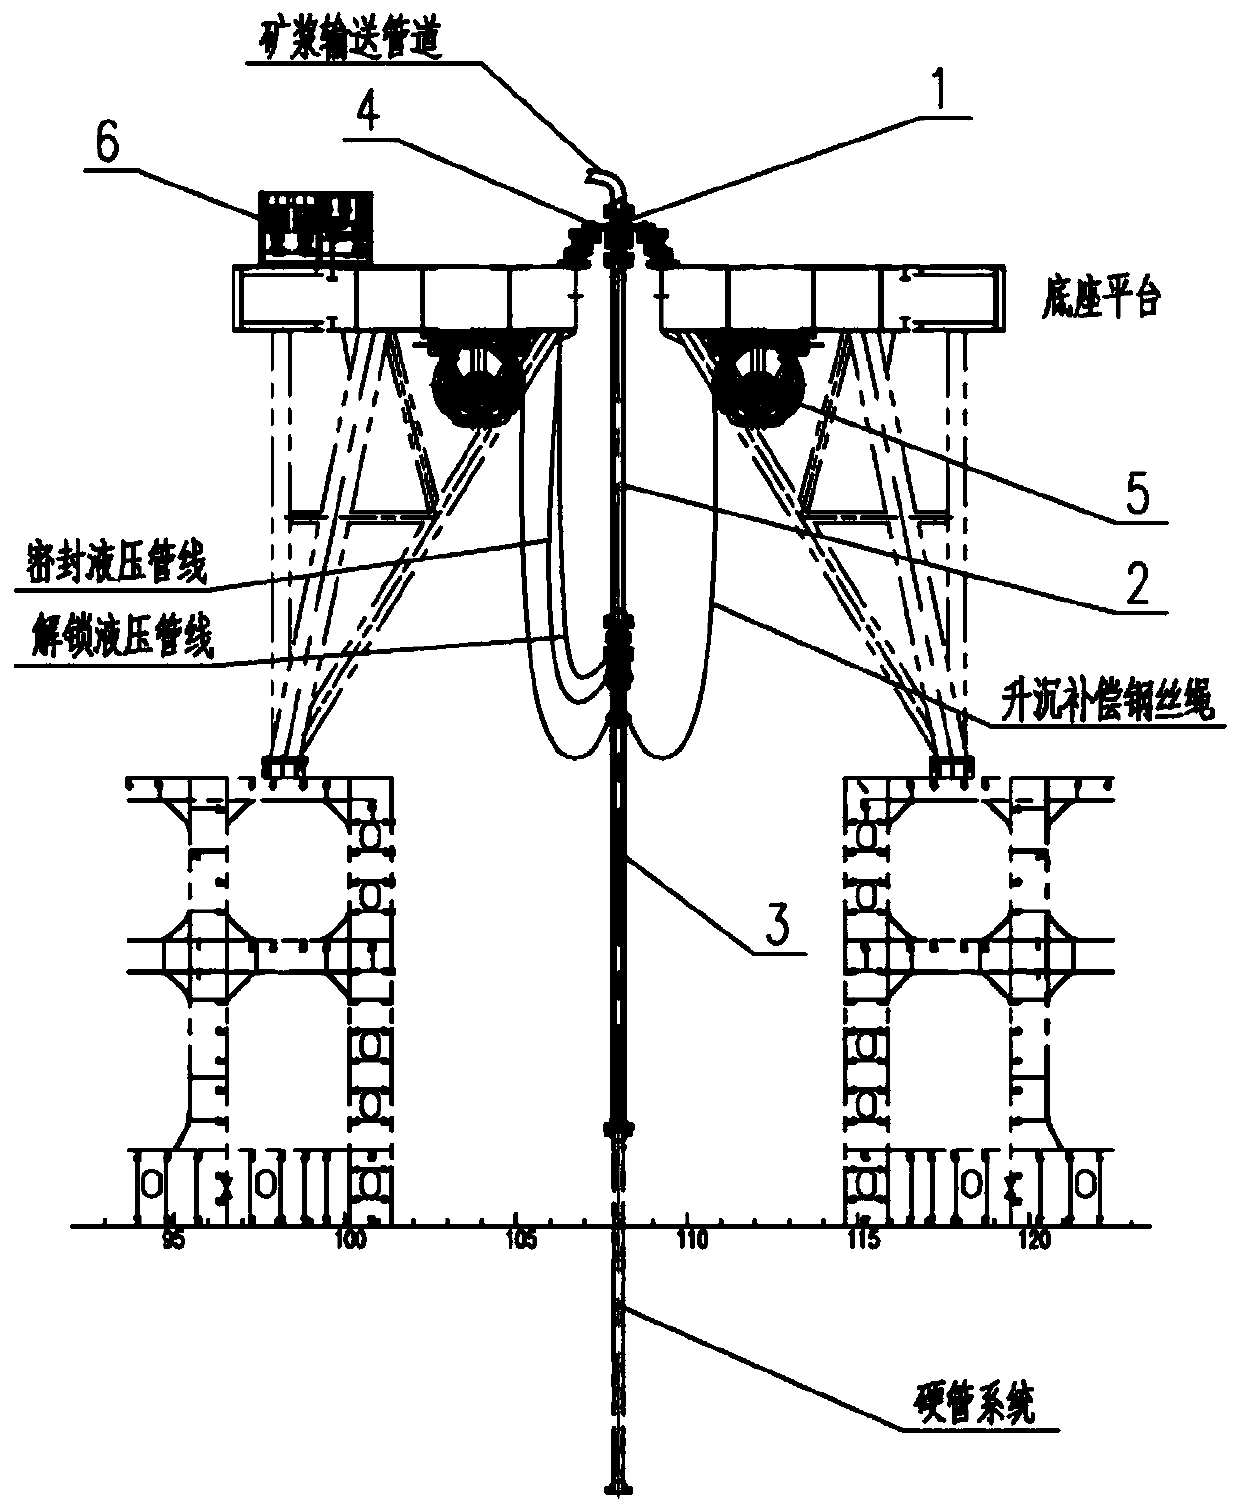 Pipe-ship connection method suitable for deep-sea mining